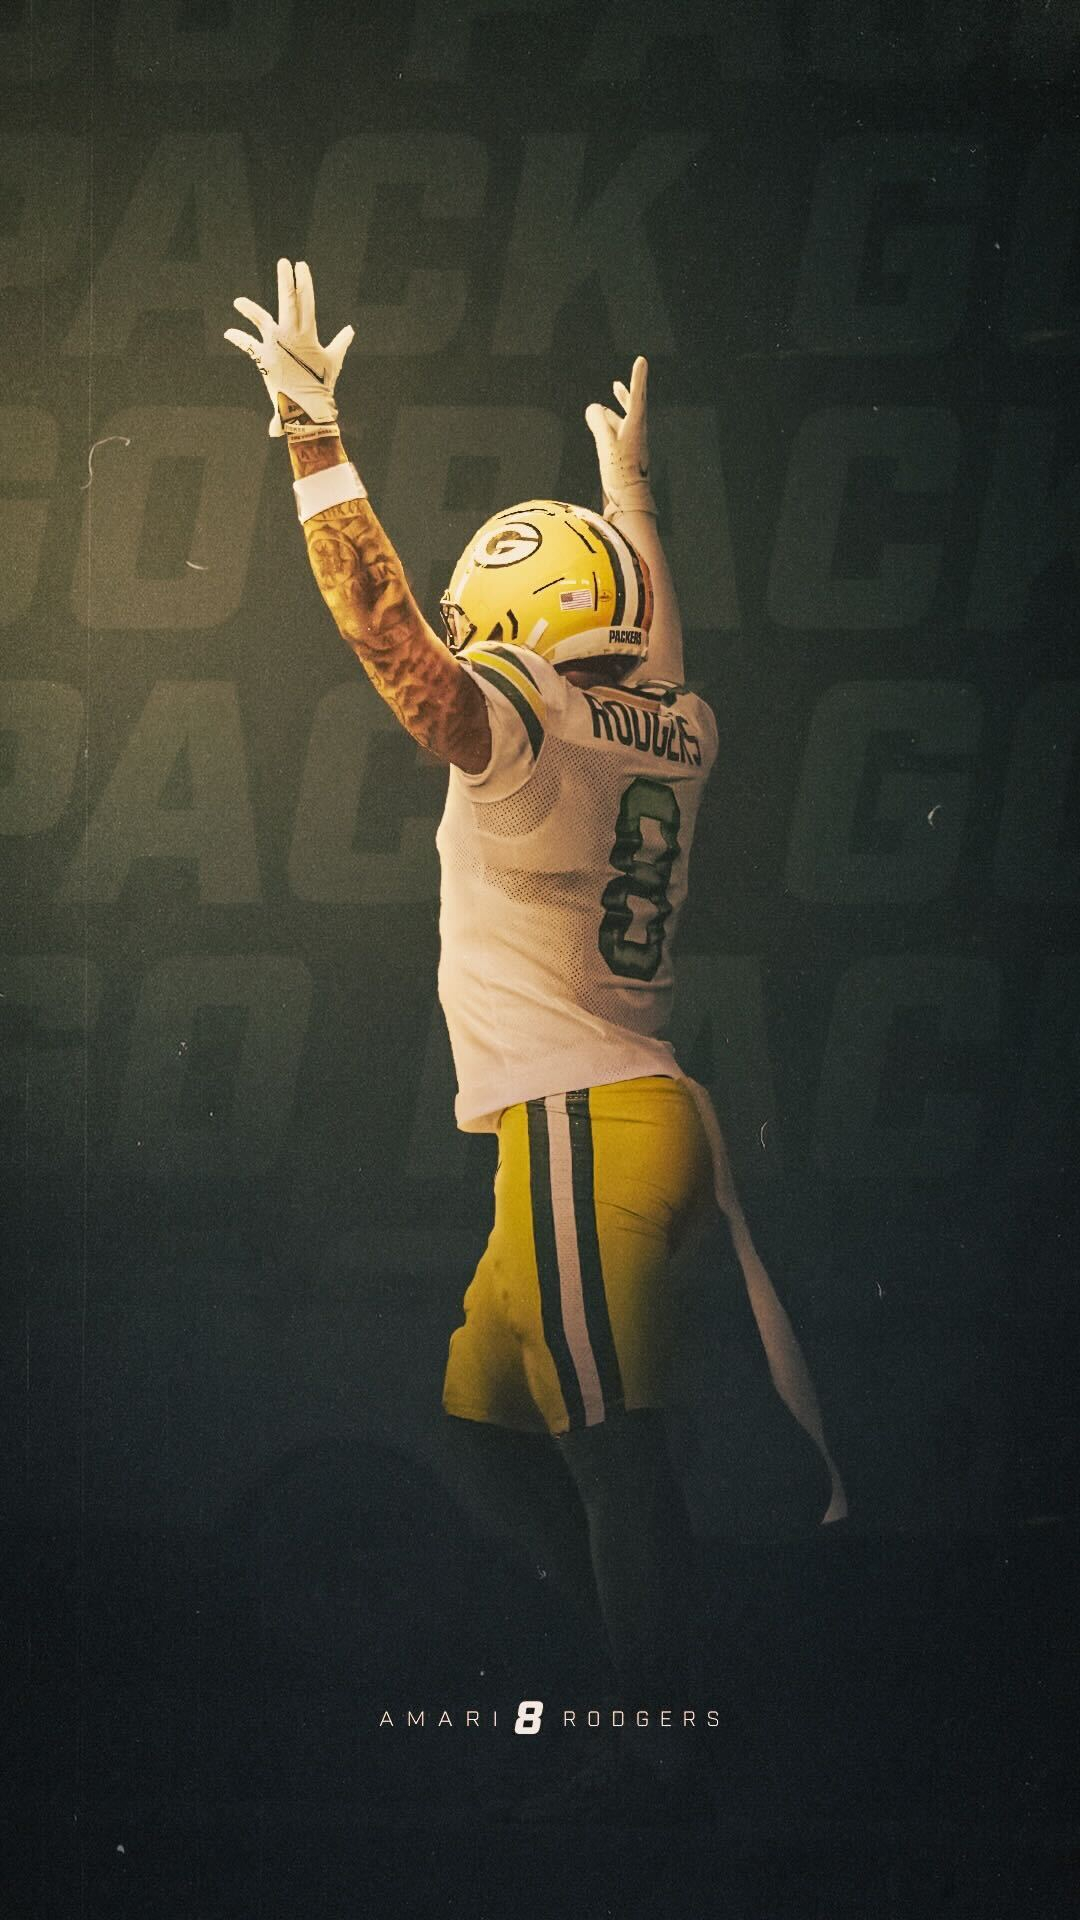 1080x1920 Packers Mobile Wallpapers | Green Bay Packers &acirc;&#128;&#147;